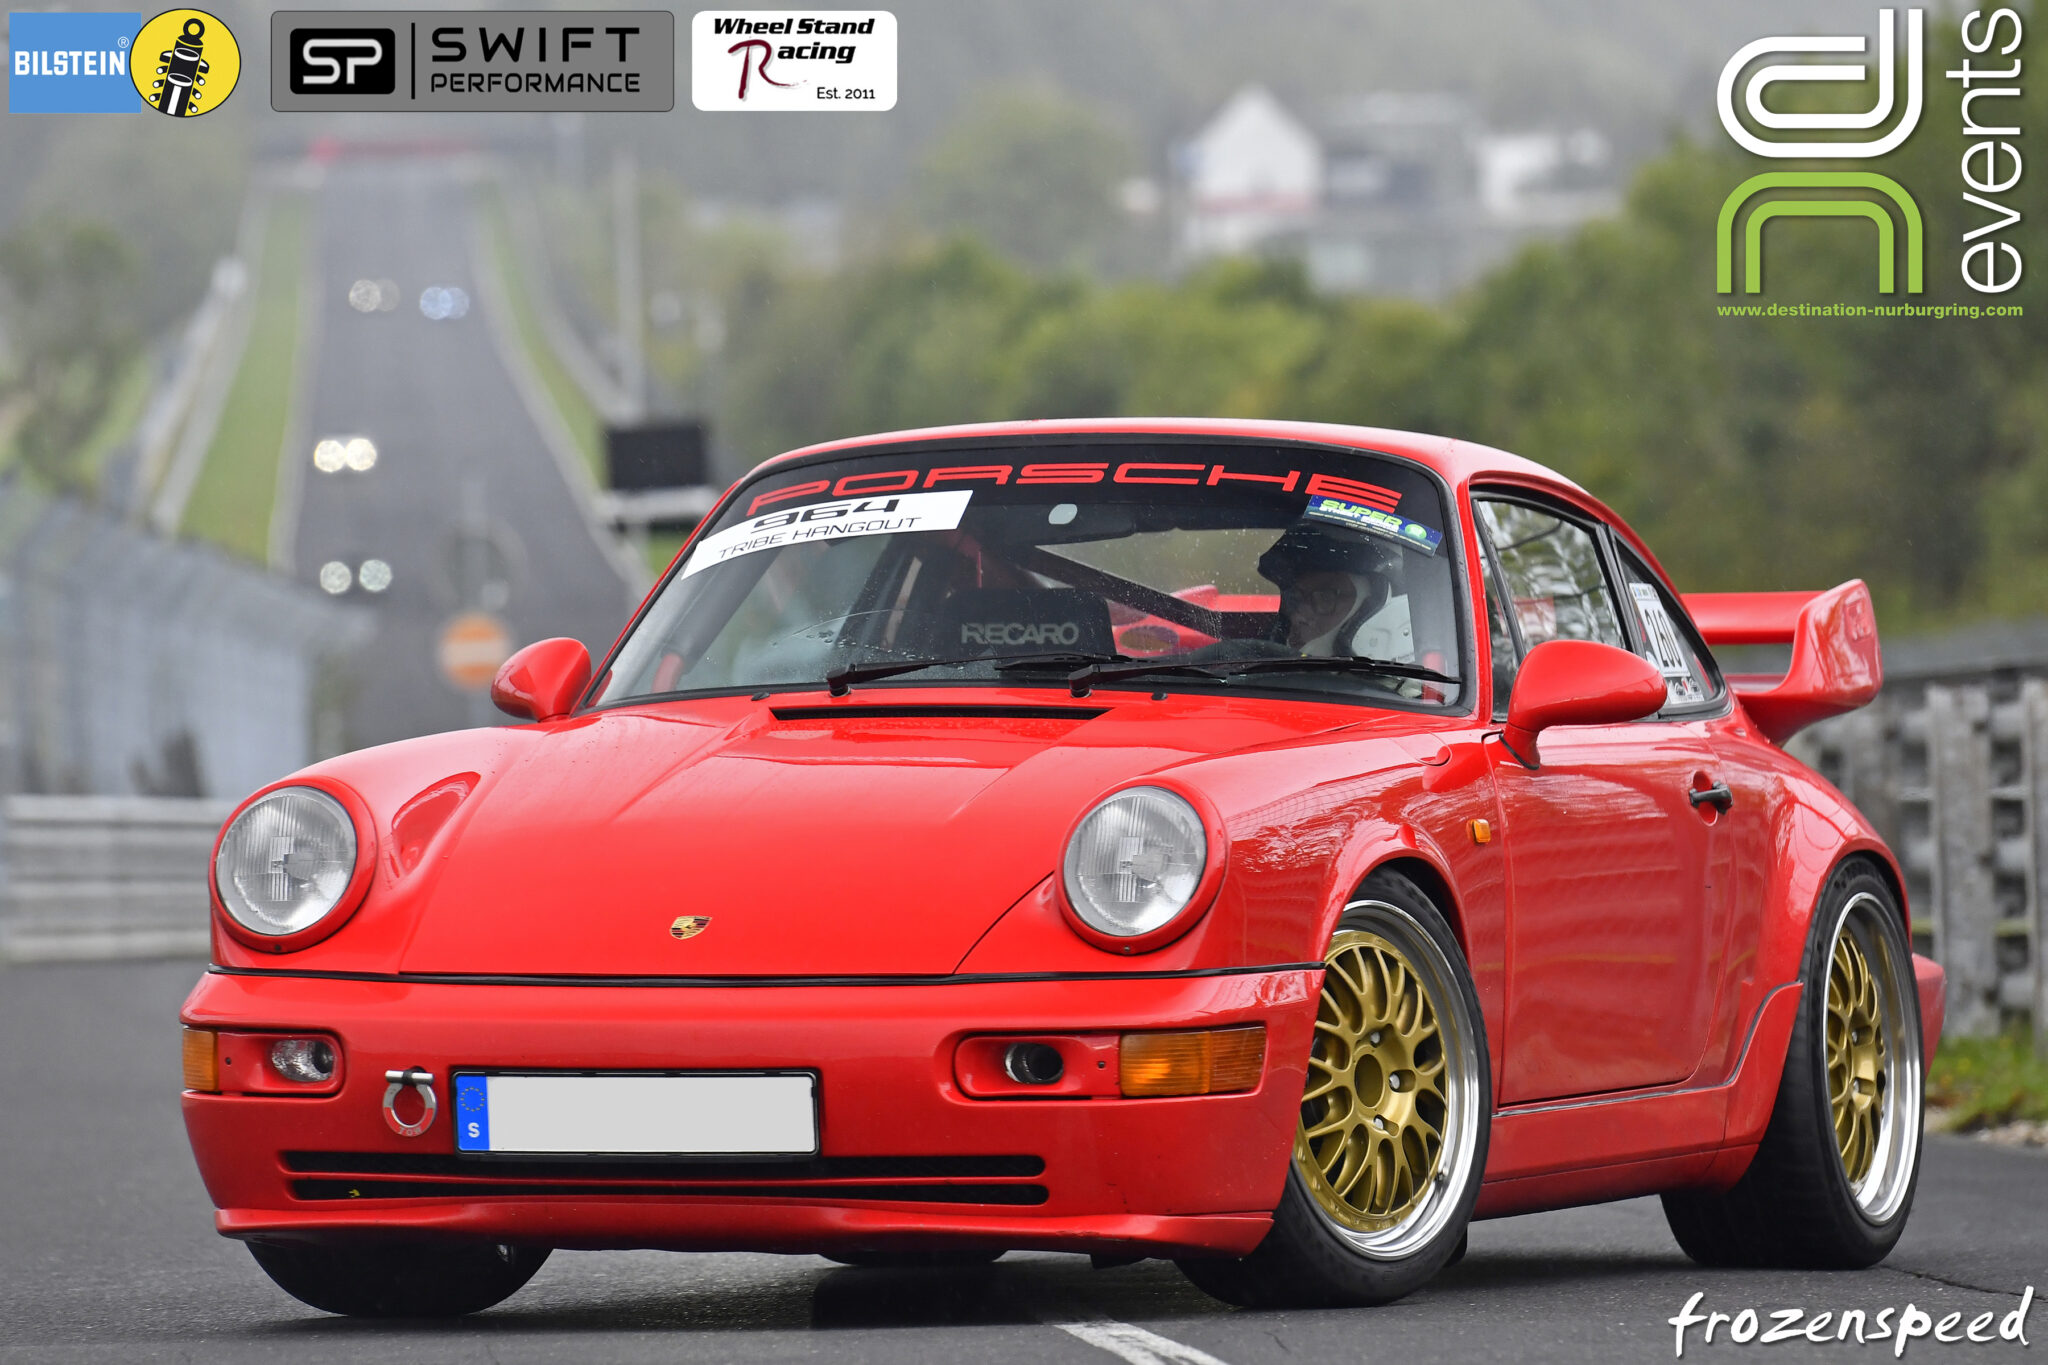 A red Porsche 964 track car leaves the track at the exit point